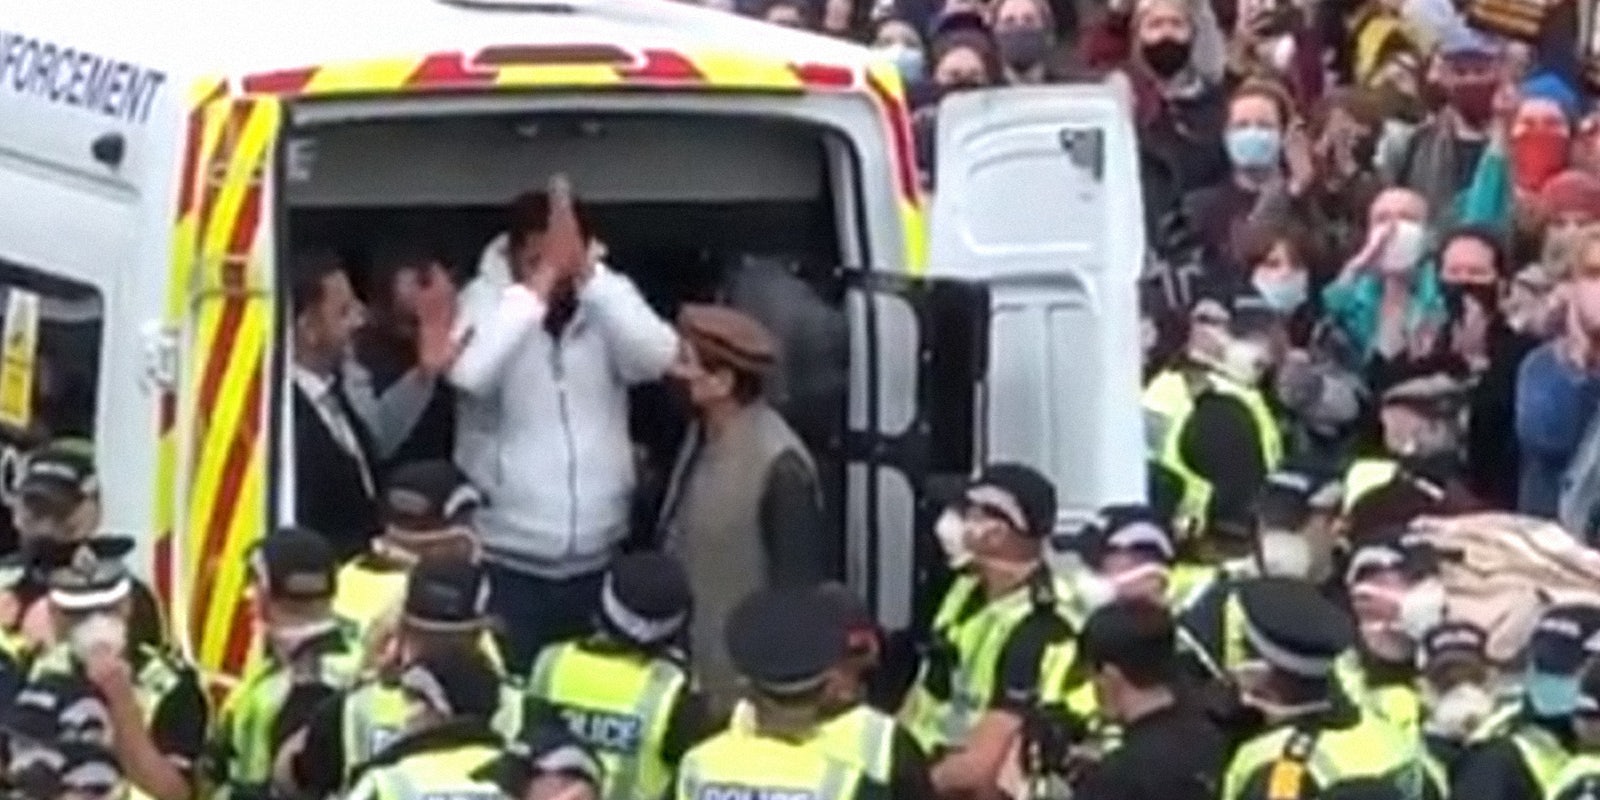 man holding hands together in thanks while exiting the back of a police van, surrounded by police and neighbors